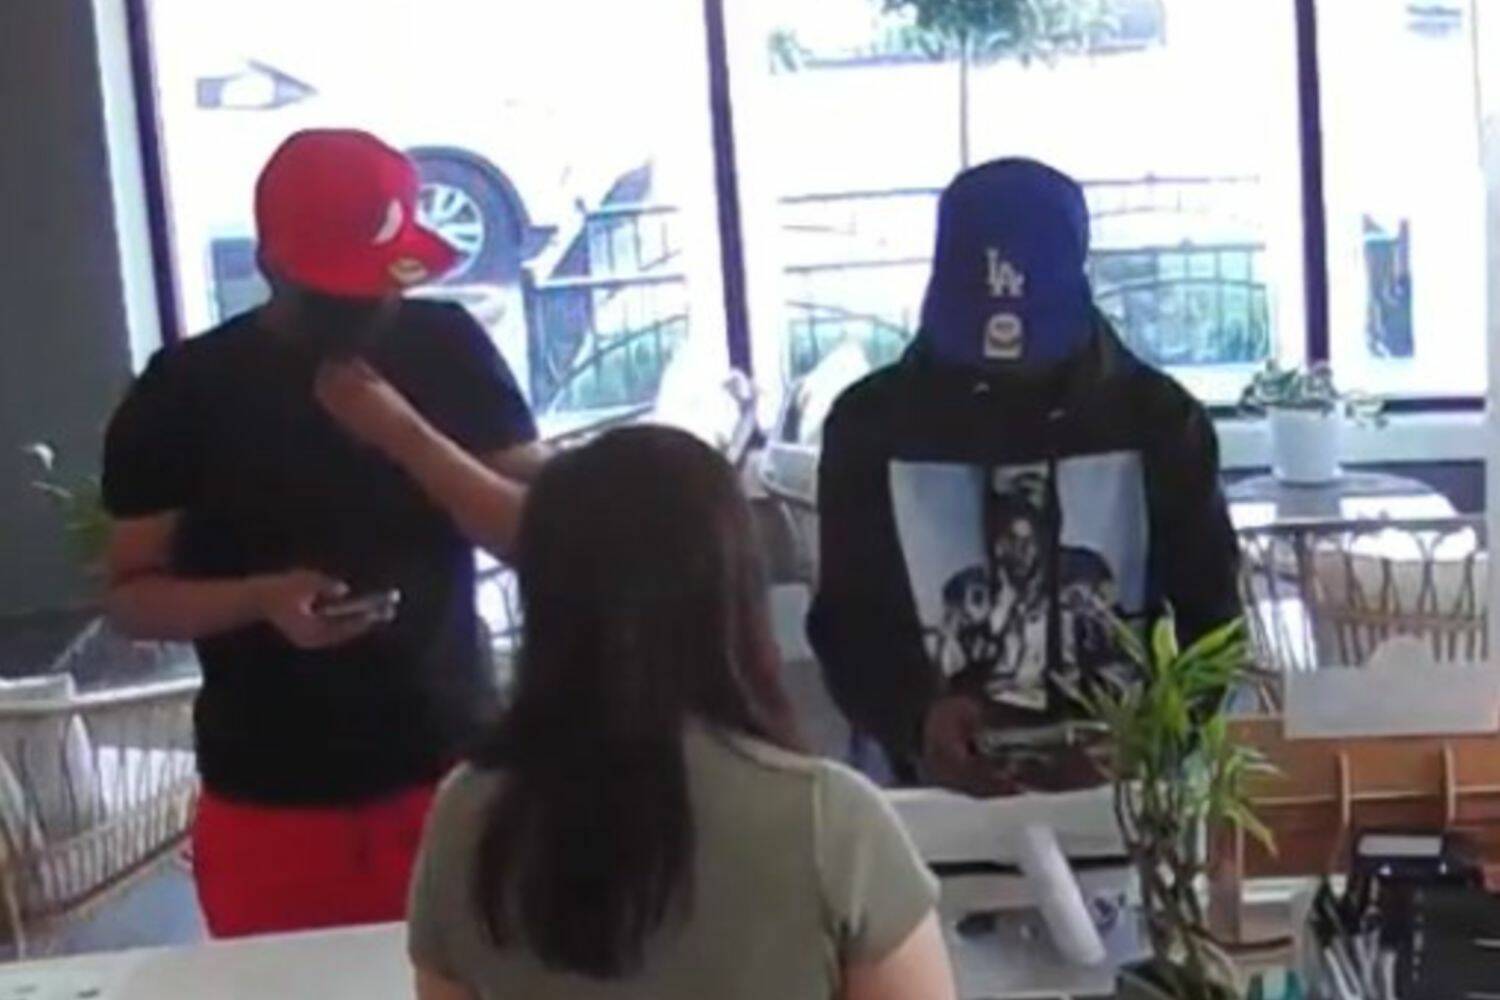 Screenshot from RPD Facebook post
Scam suspects caught on security video in Downtown Renton.